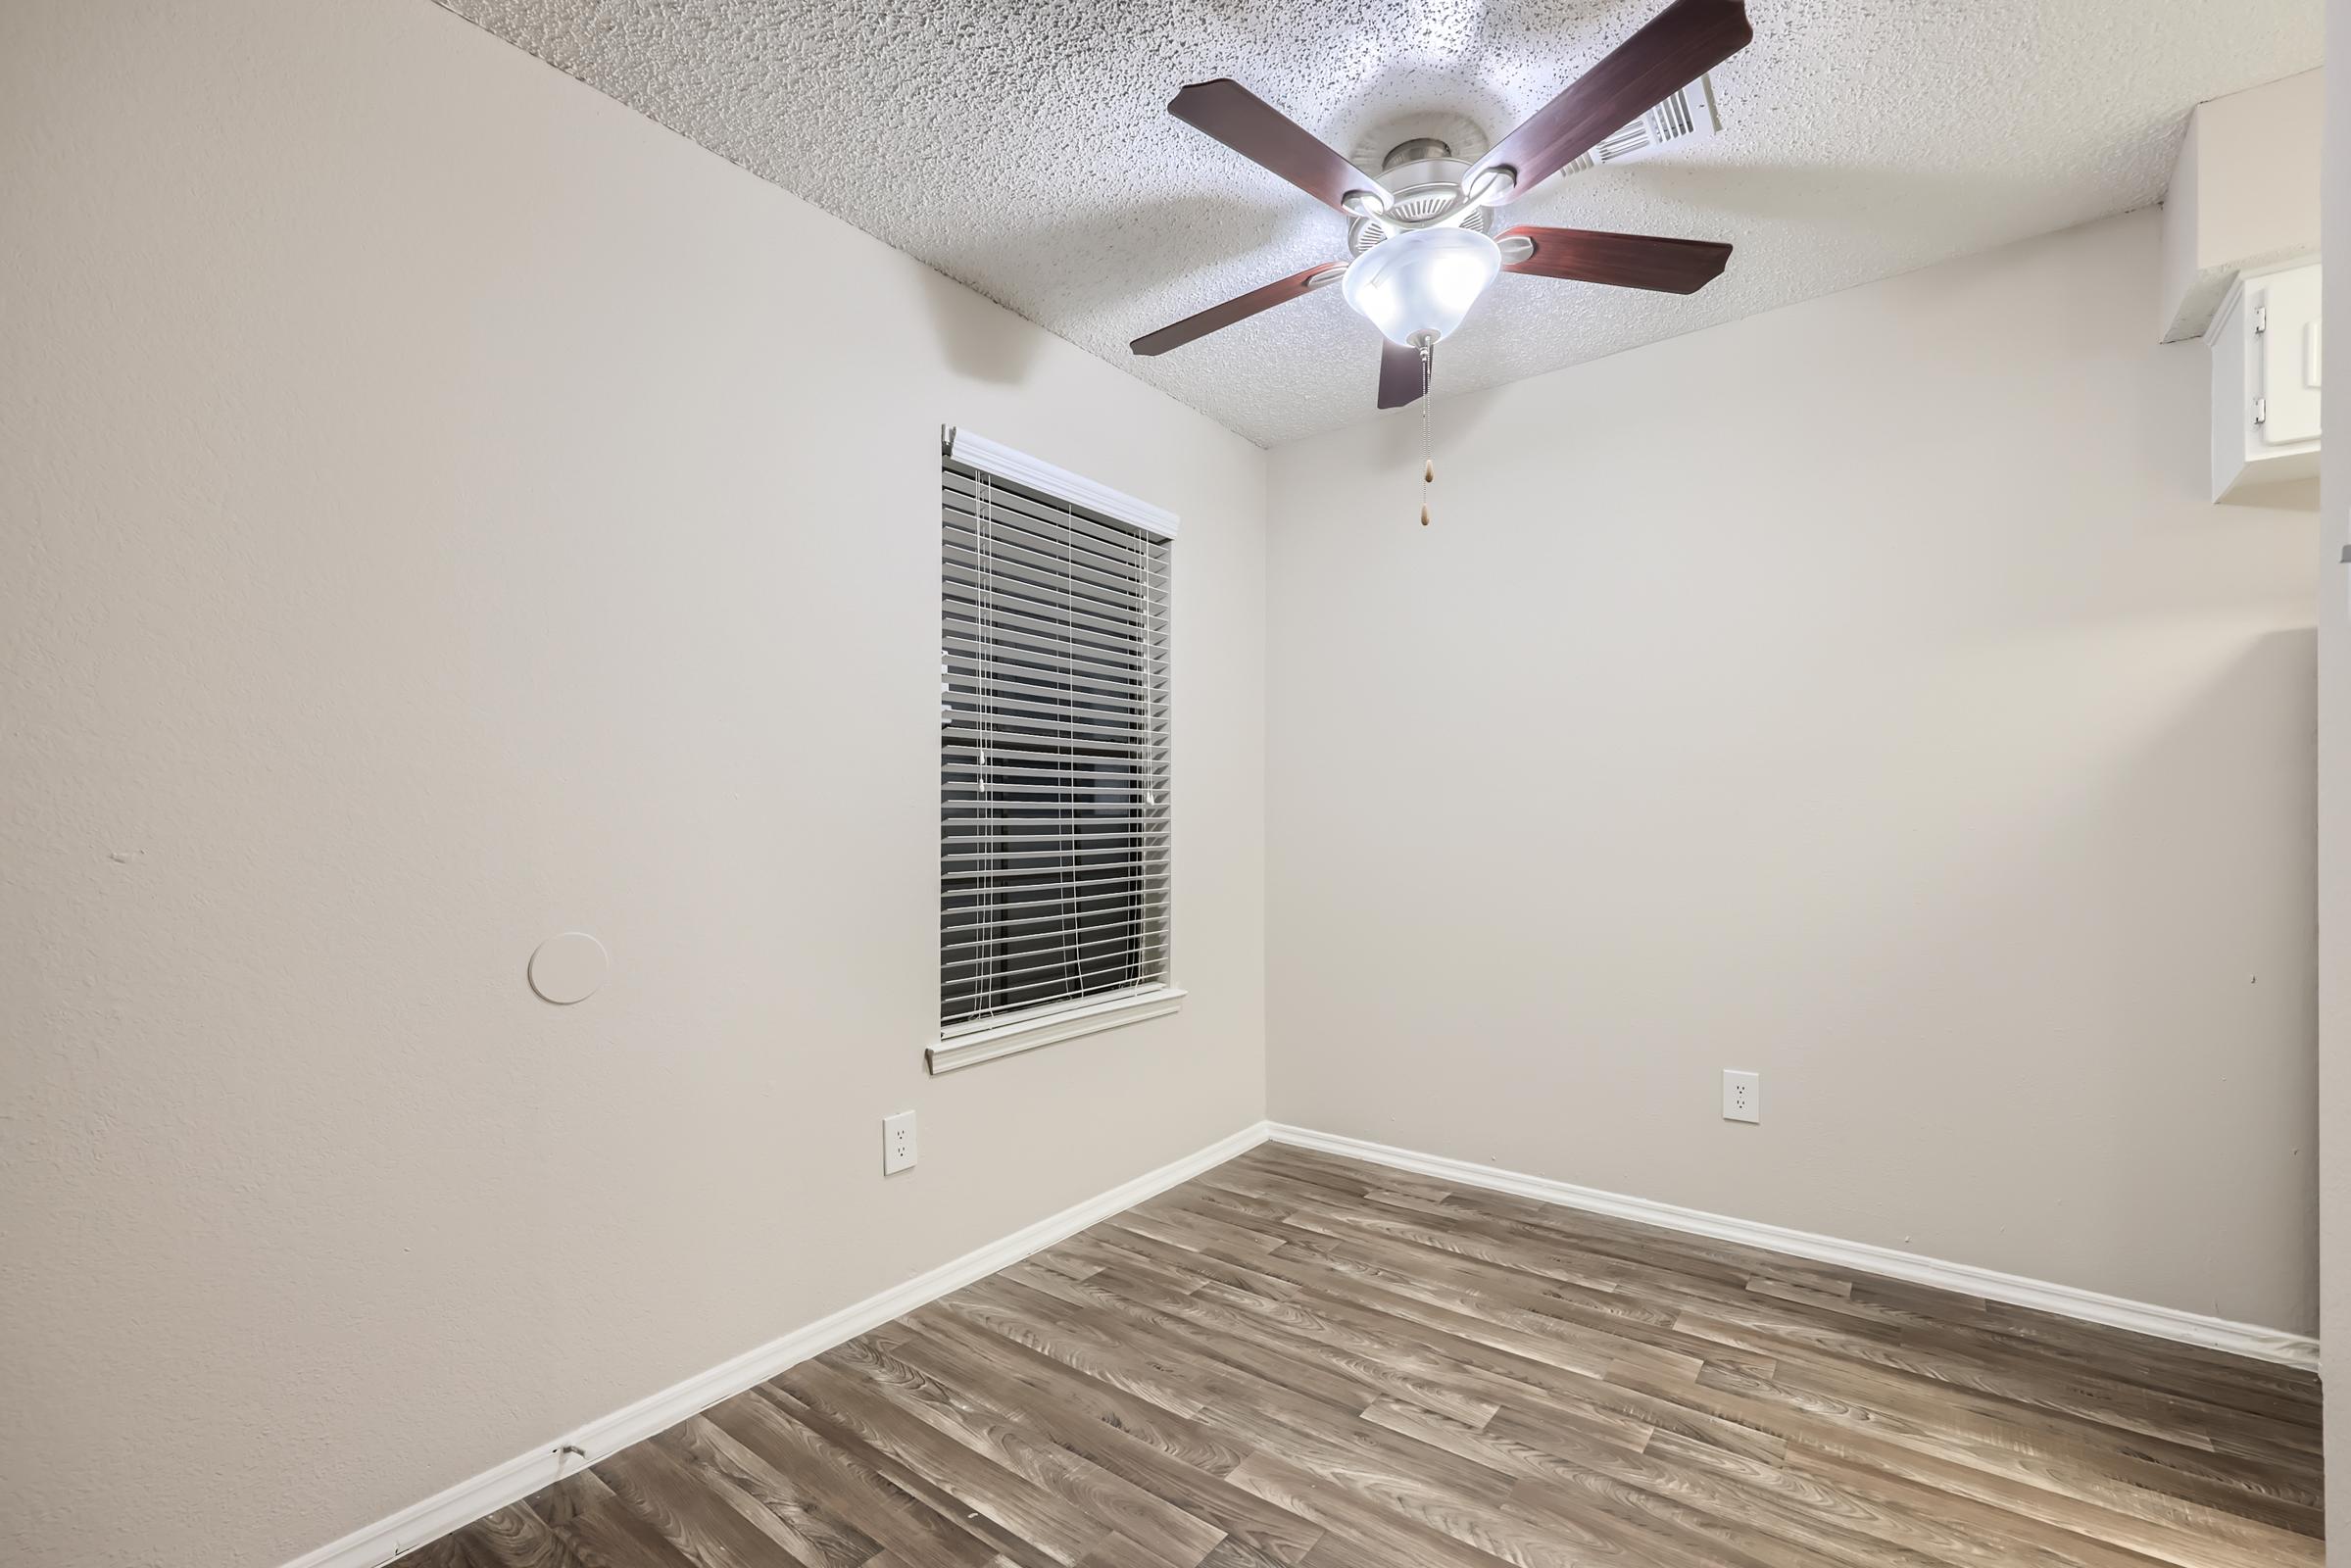 A small bedroom with wood-style floors, a ceiling fan and a window at Rise Oak Creek.